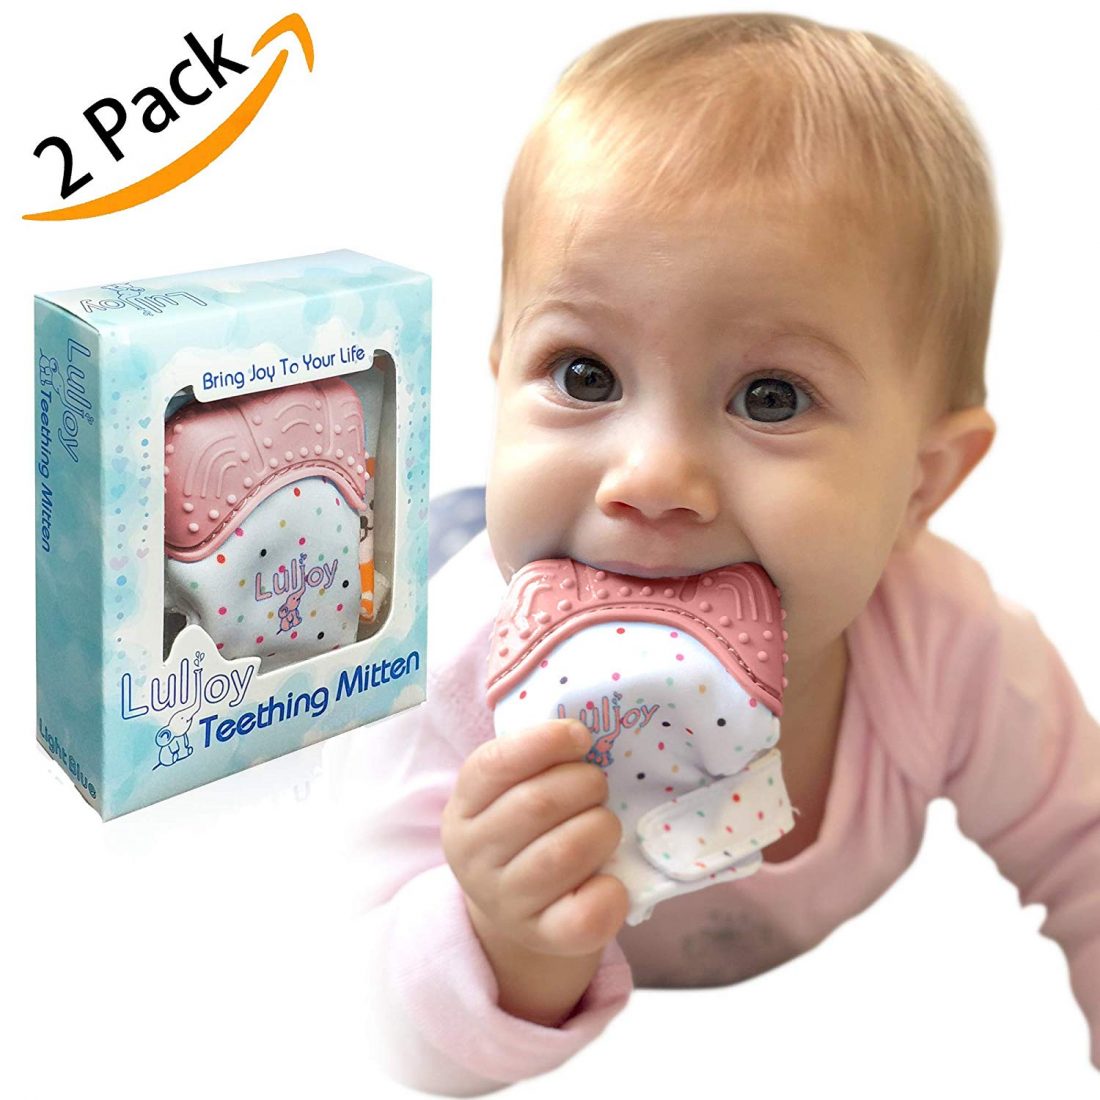 Liname 2 Pack Teething Mitten with Soothing Toy Infant Teething Mitten Crinkle Sound and Textured Silicone to Soothe Sore and Swollen Gums Baby Chew Toy and Teething Glove 